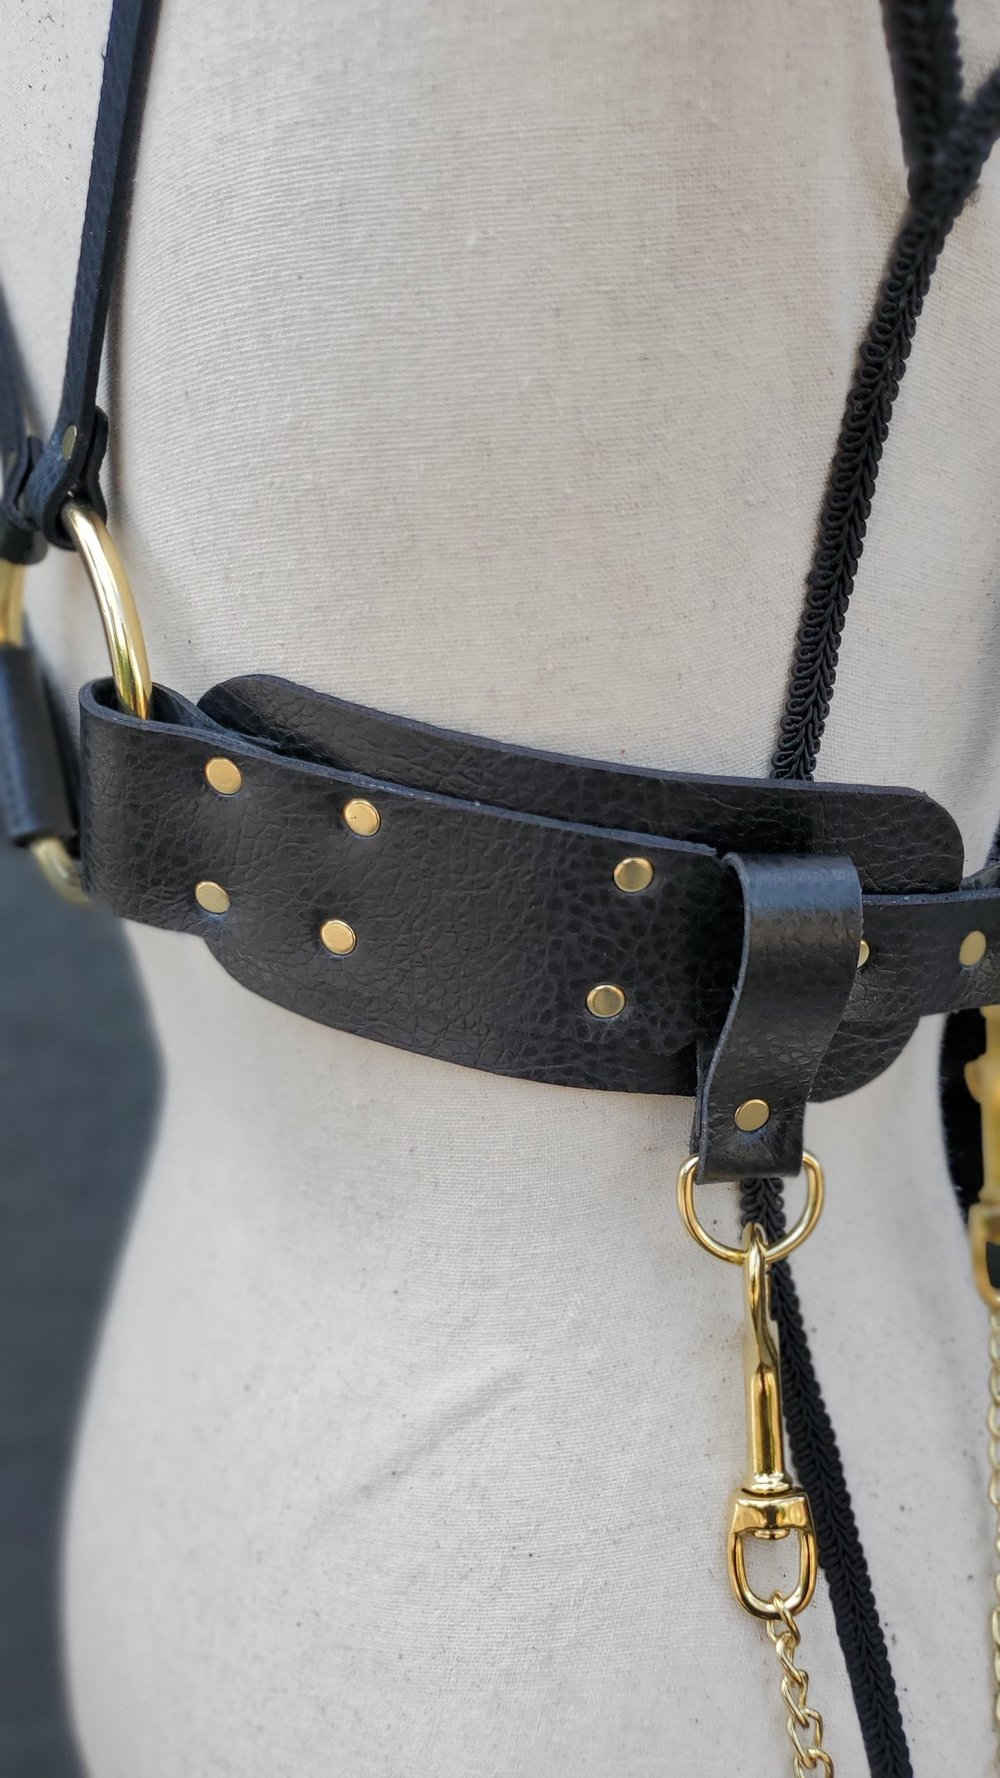 accessory of the season, harnesses. From  Harness fashion, Diy leather  harness, Fashion